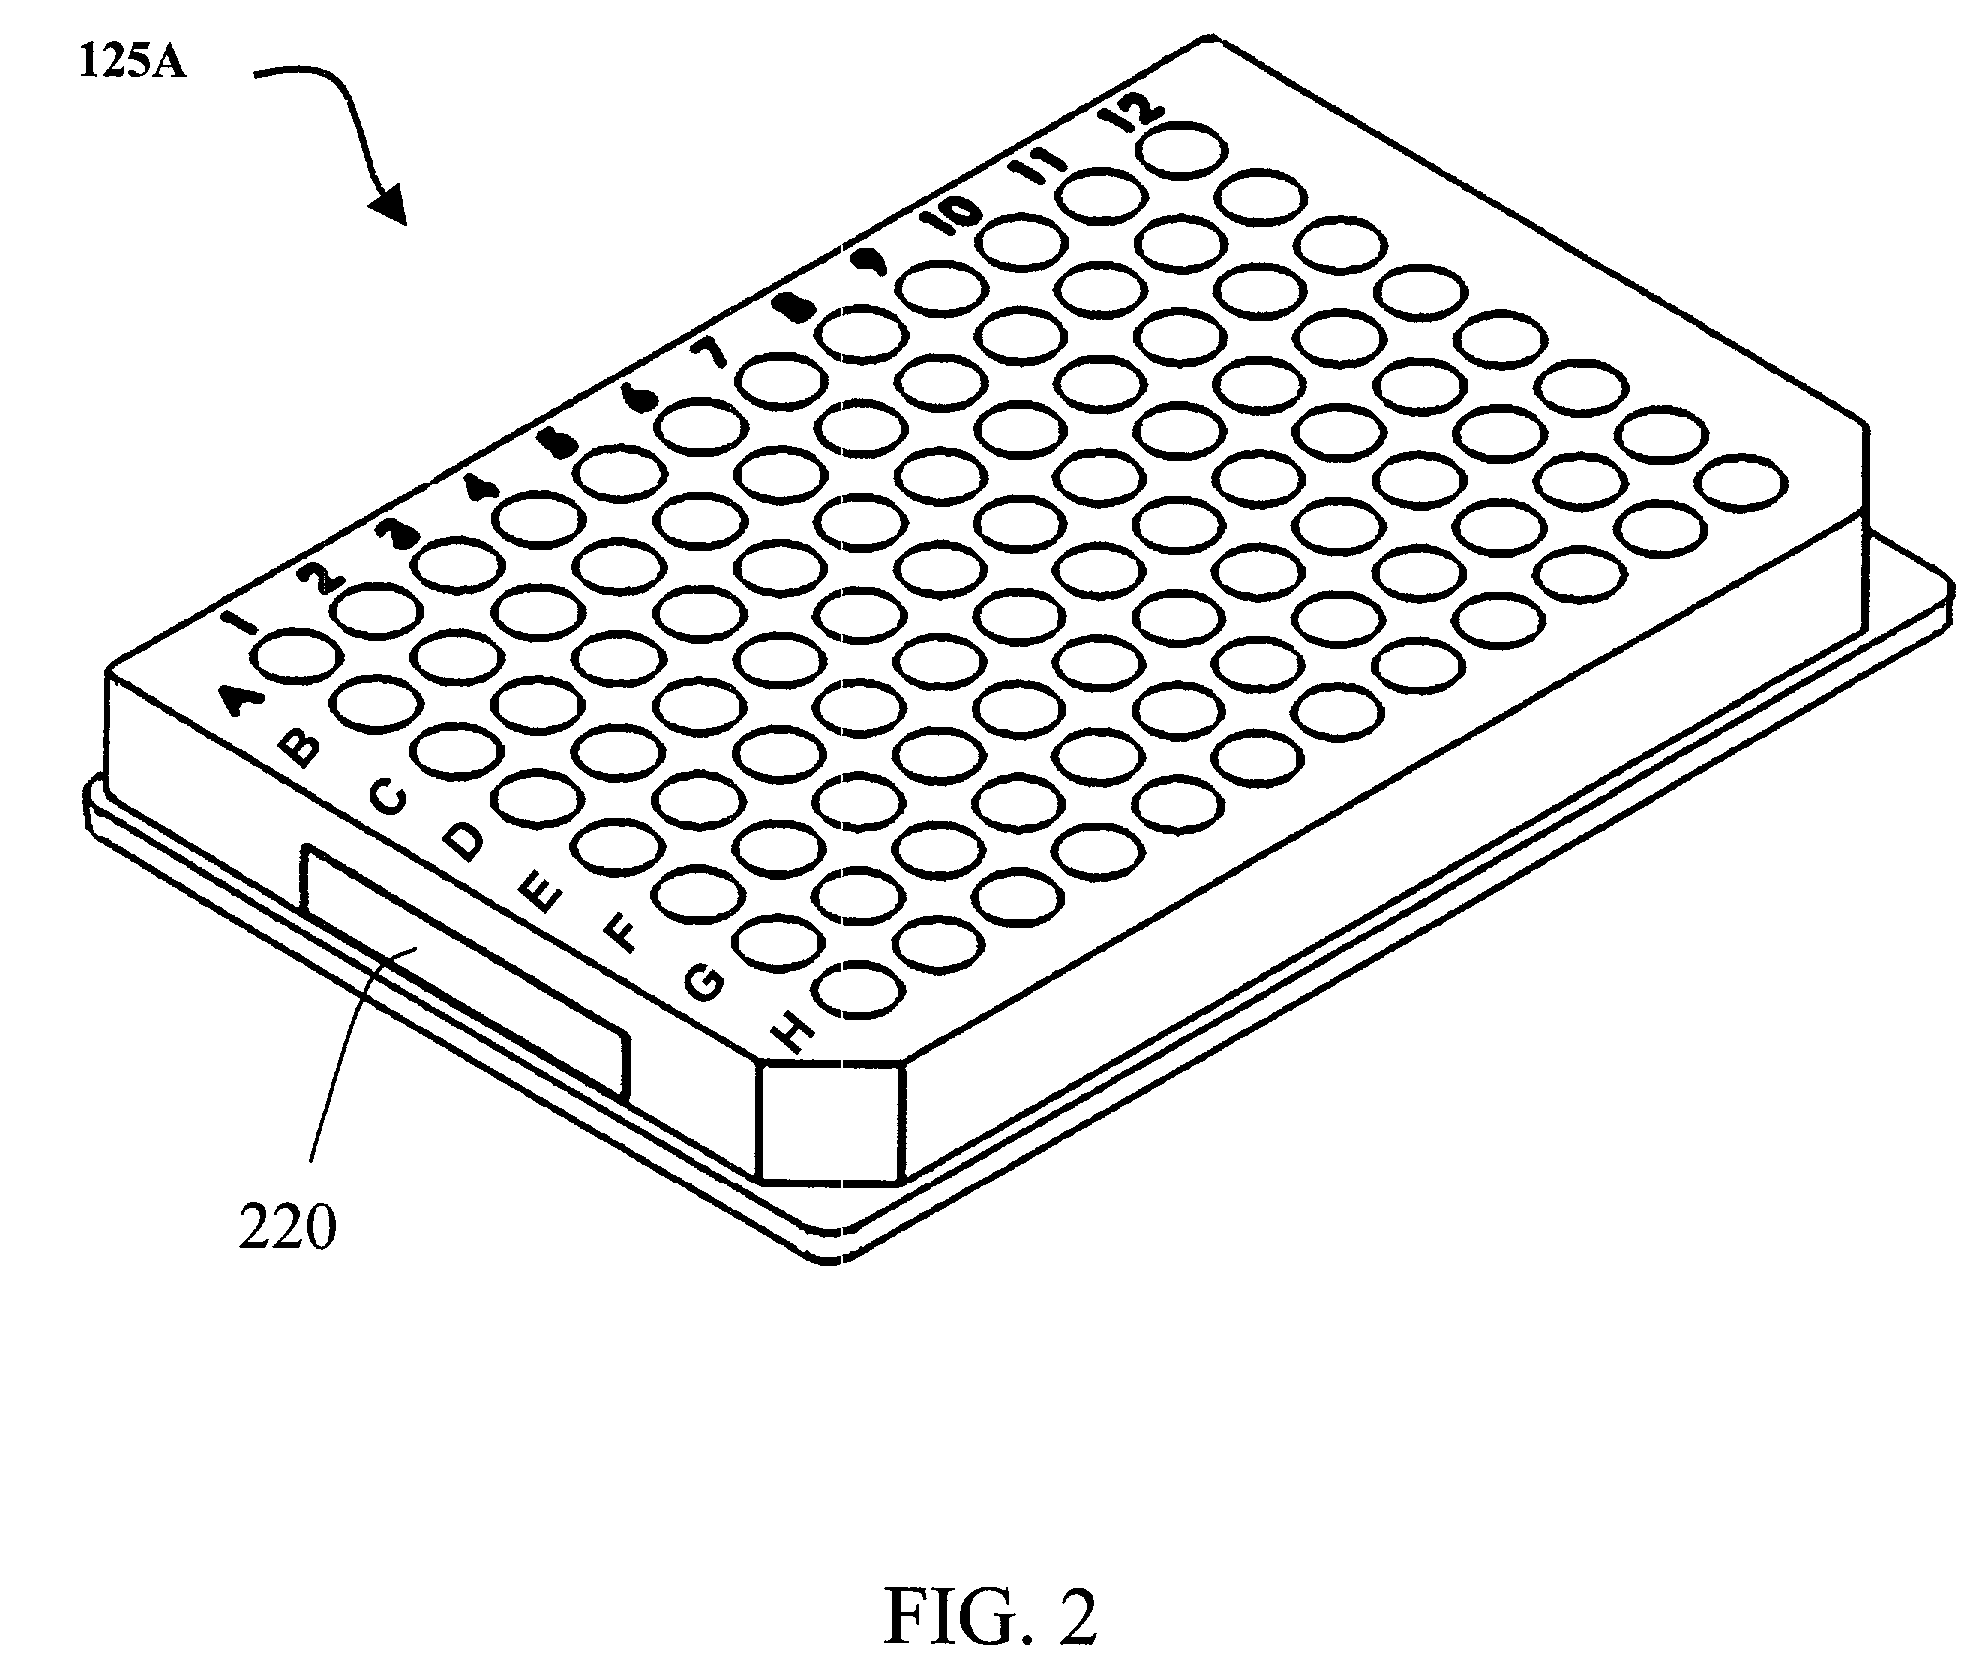 Automated verification and inspection device for sequentially inspecting microscopic crystals